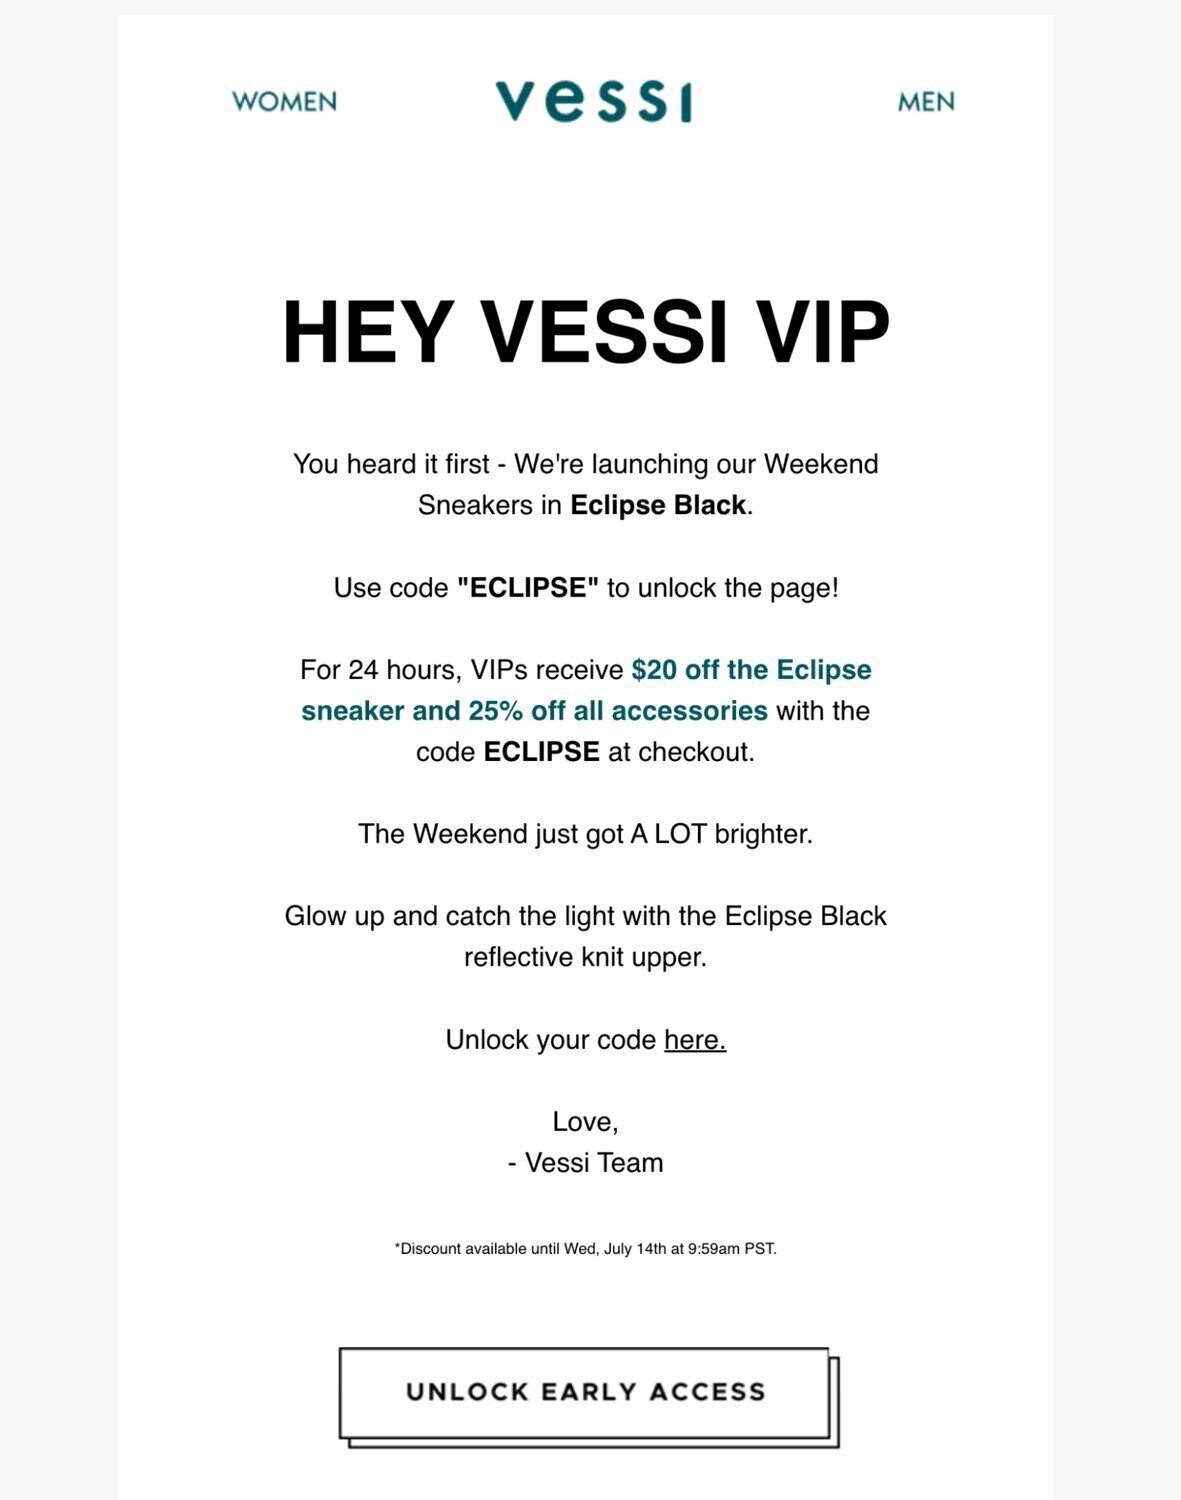 Product launch email from Vessi